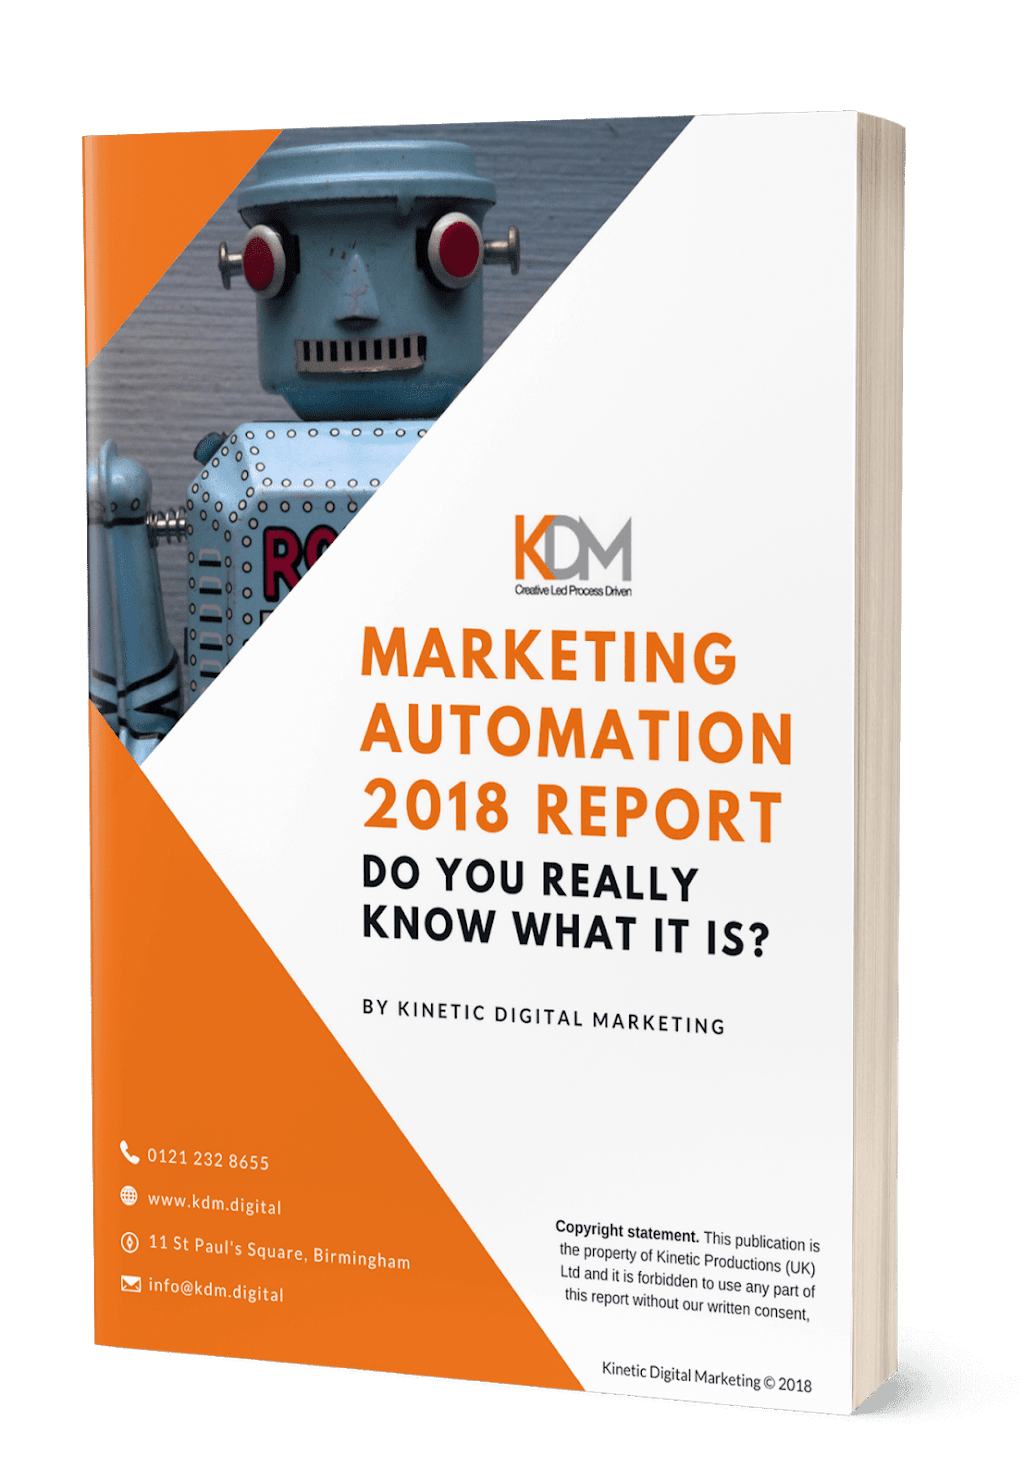 marketing automation 2018 report by KDM digital marketing consultancy